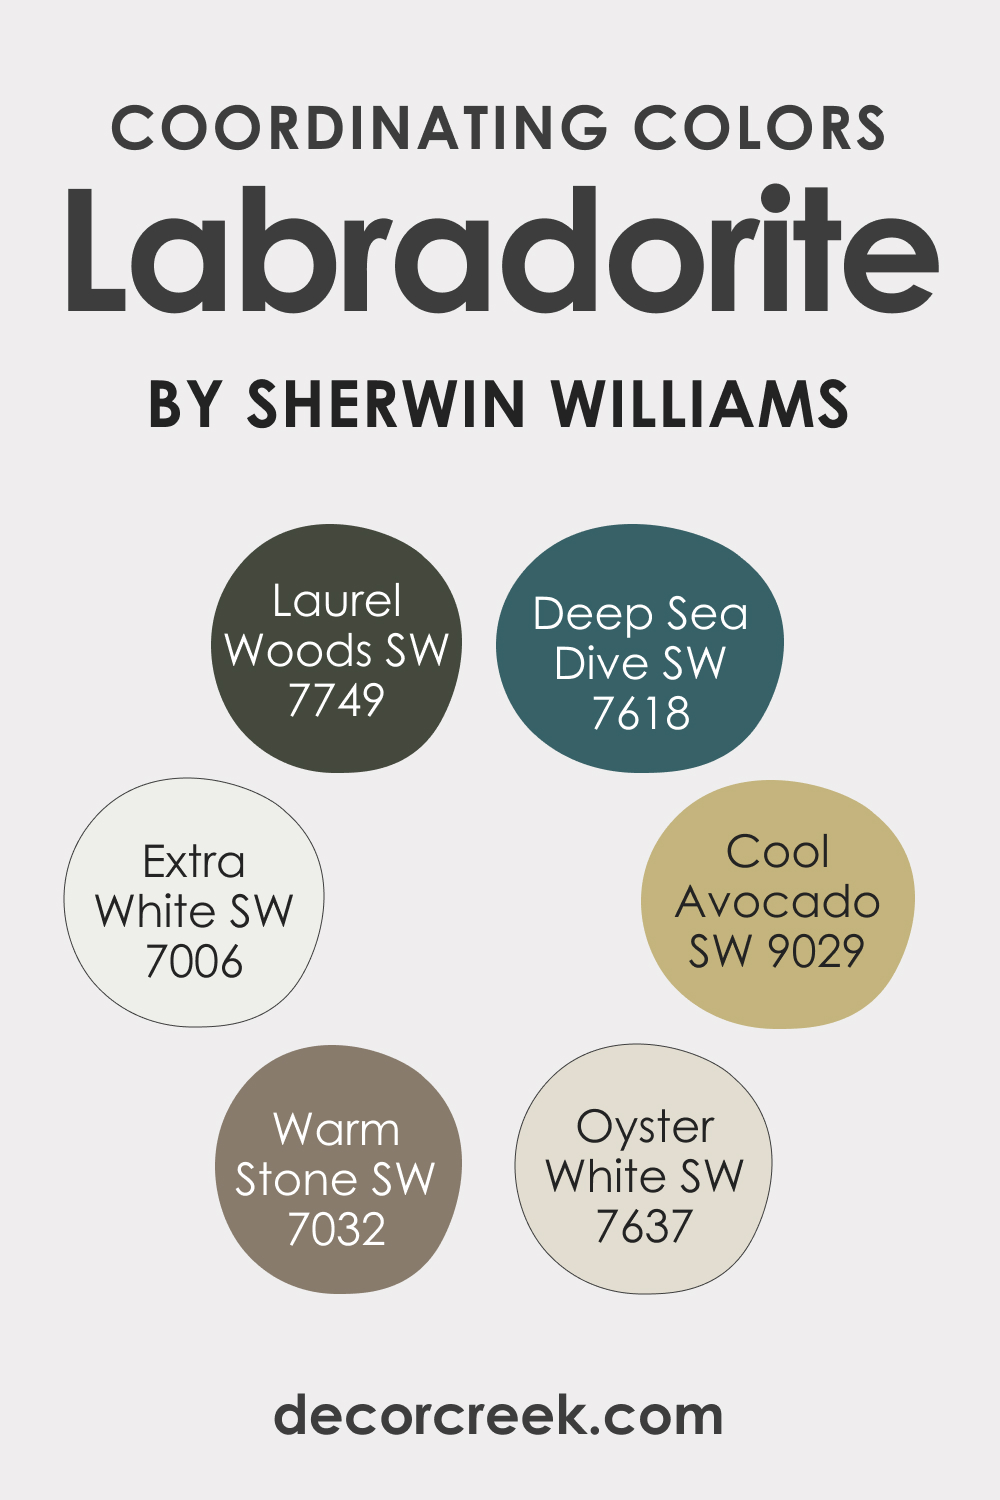 Labradorite SW 7619 Paint Color by Sherwin-Williams